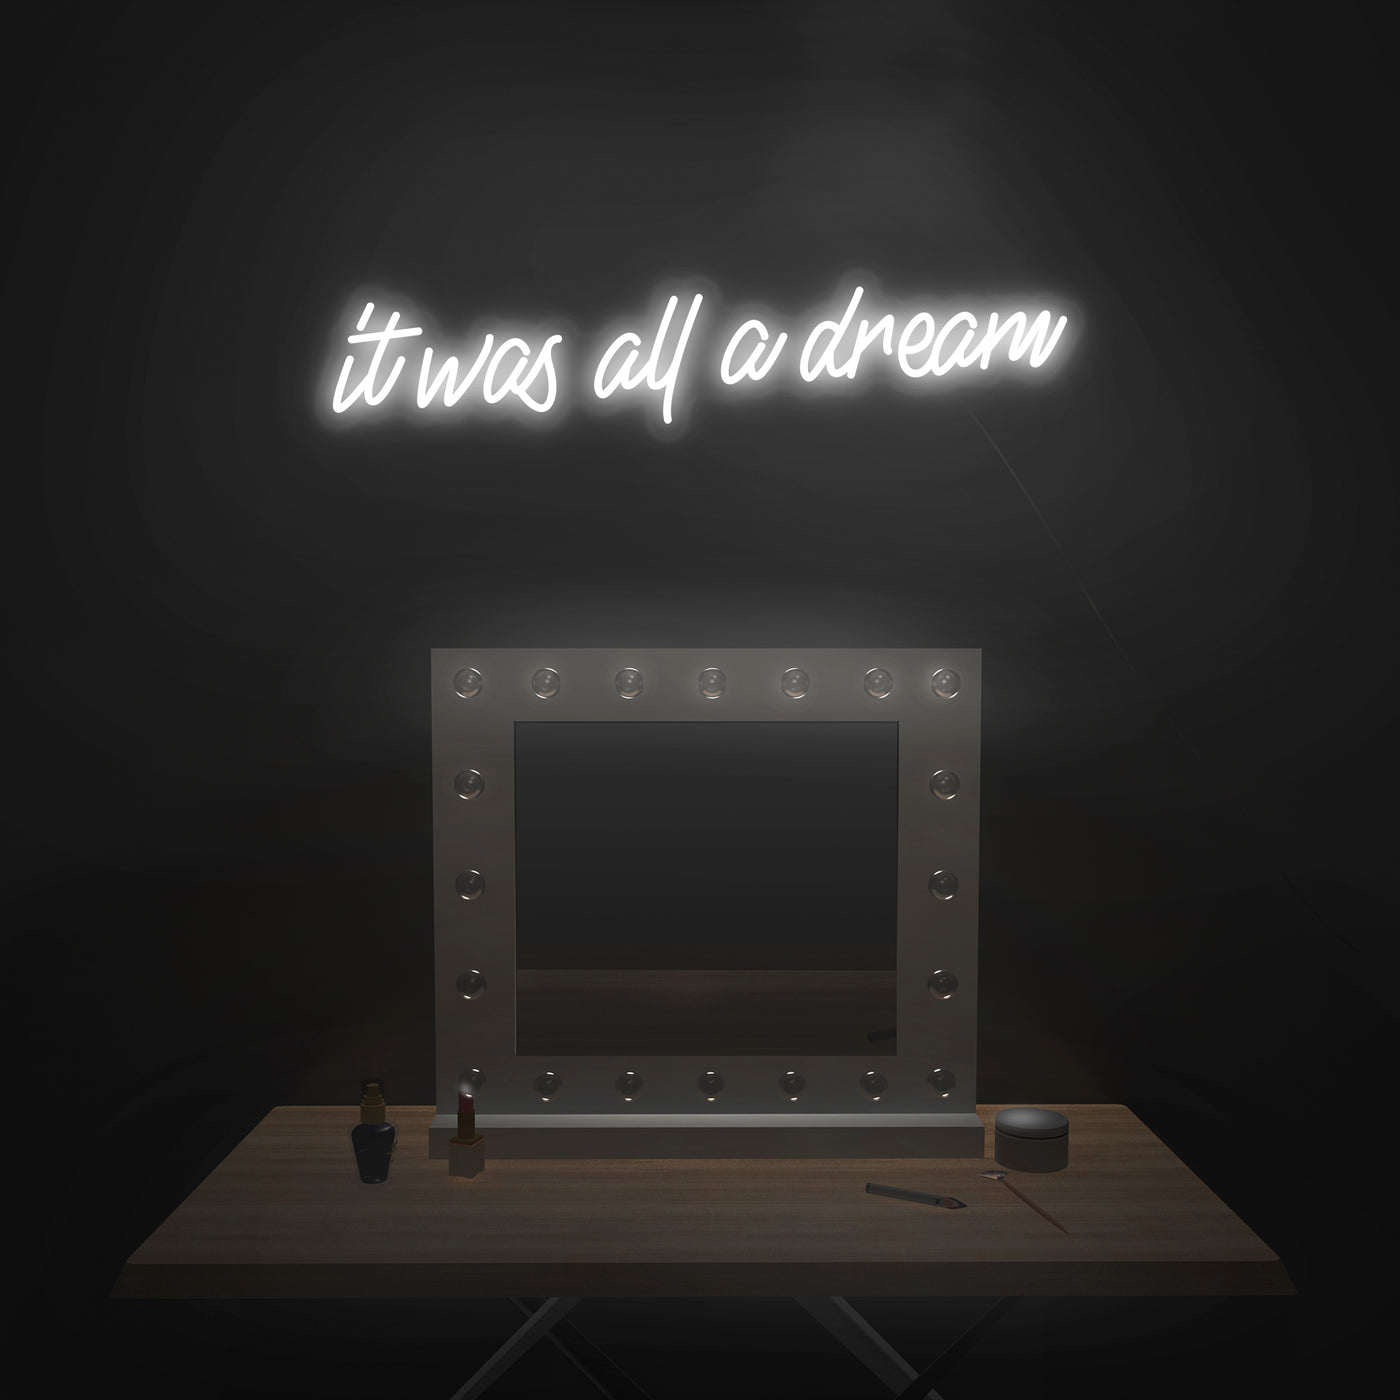 'It was all a dream' Neon Sign - Nuwave Neon